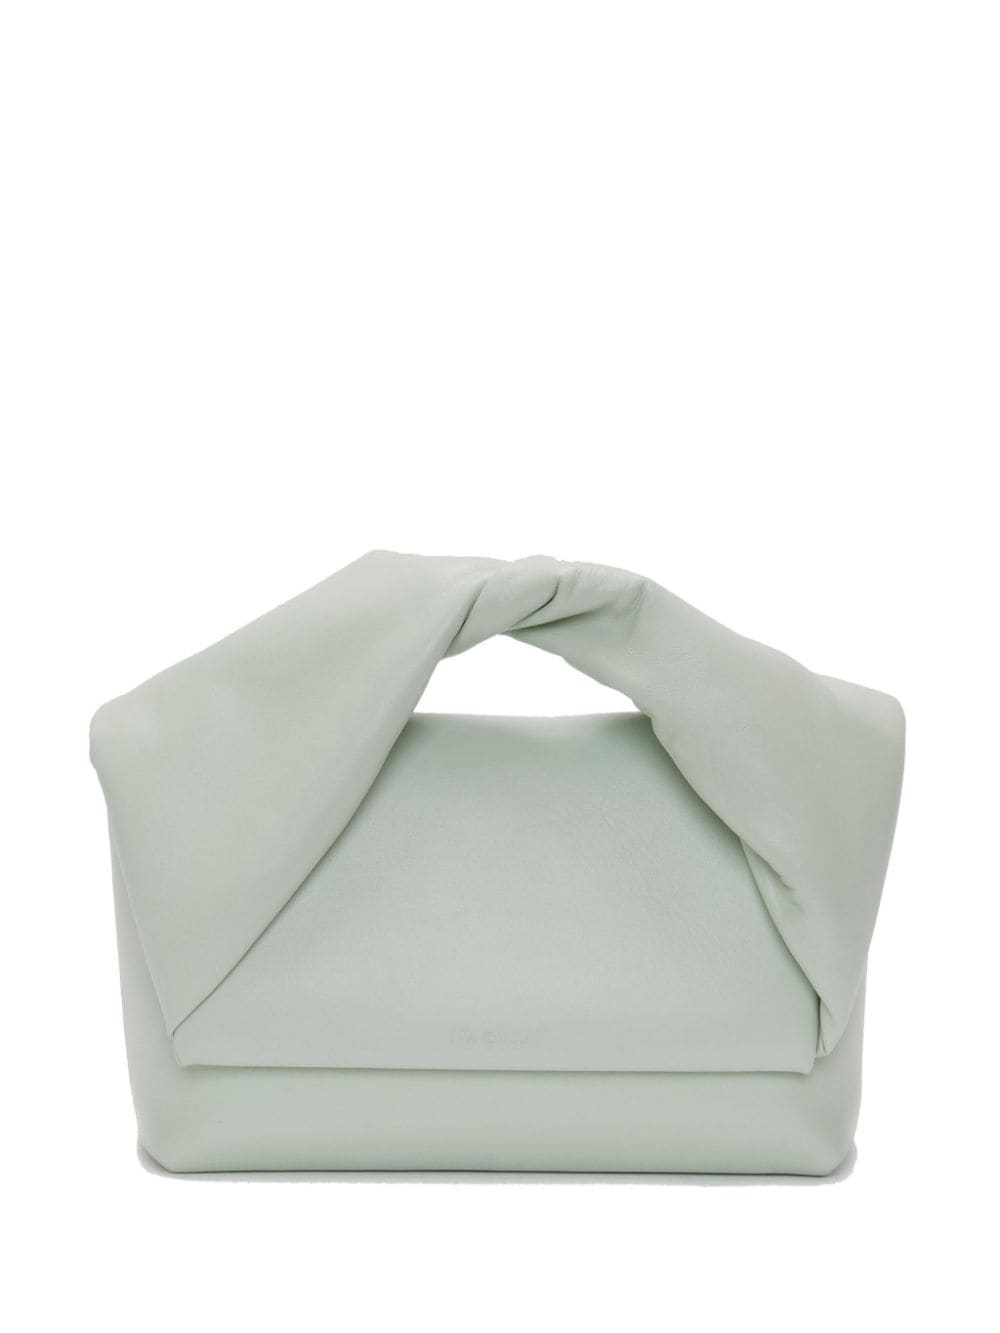 JW Anderson large Twister leather tote bag - Green